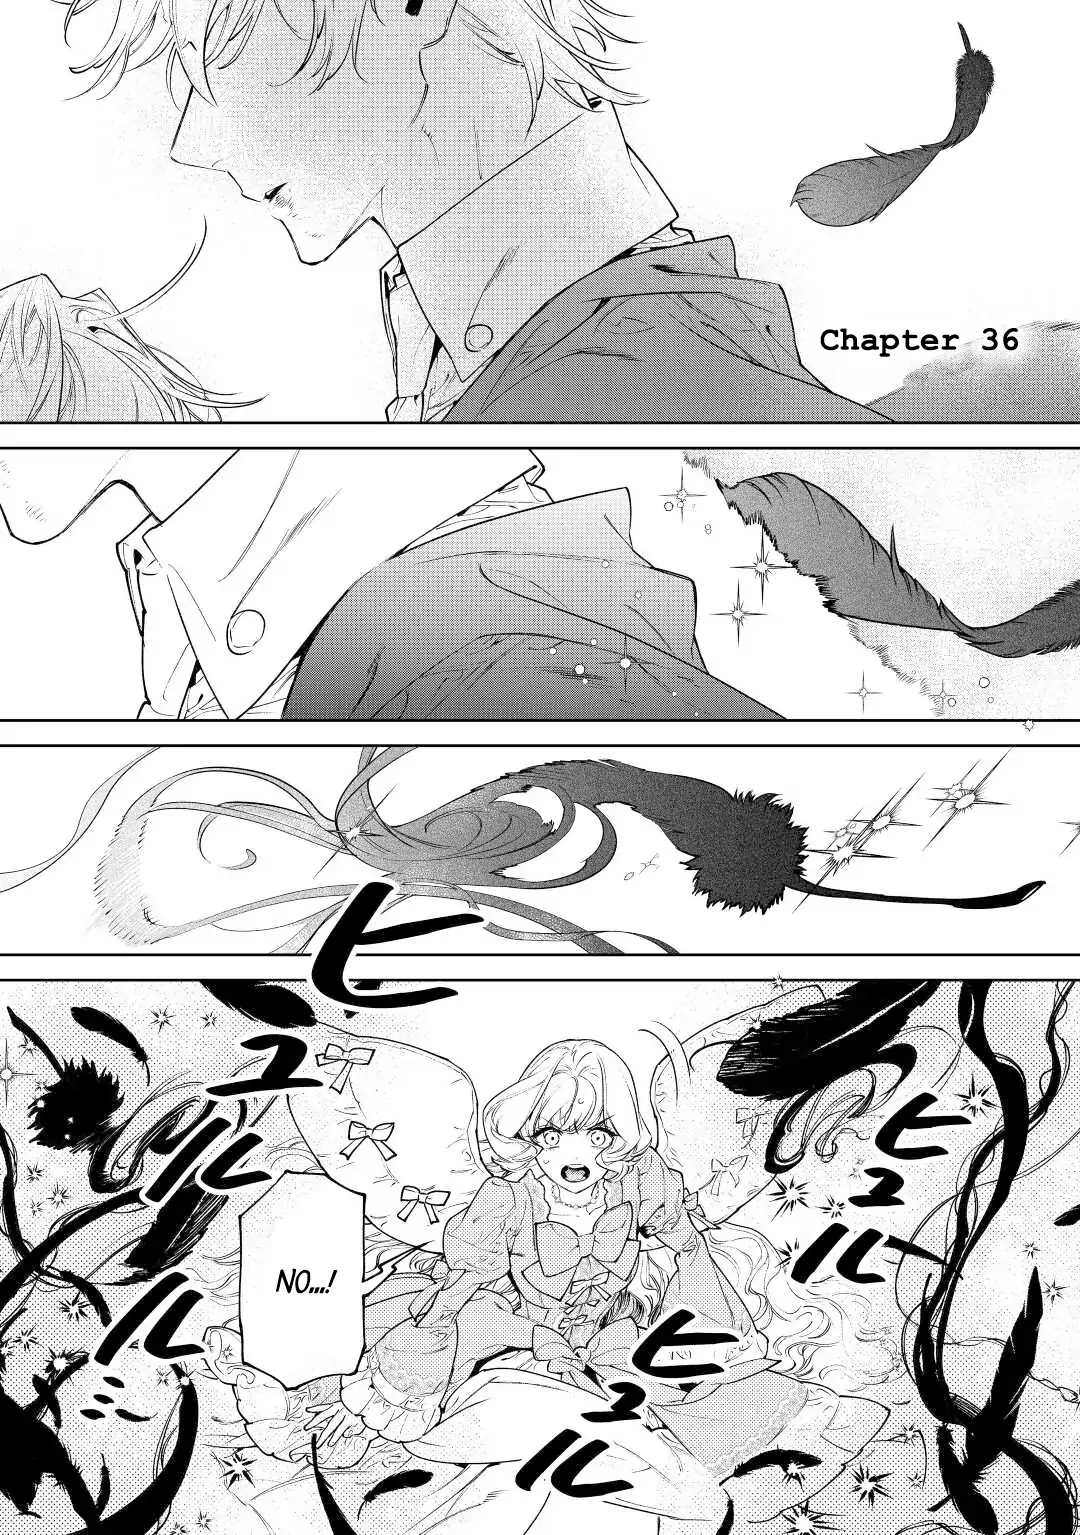 May I Please Ask You Just One Last Thing? Chapter 36